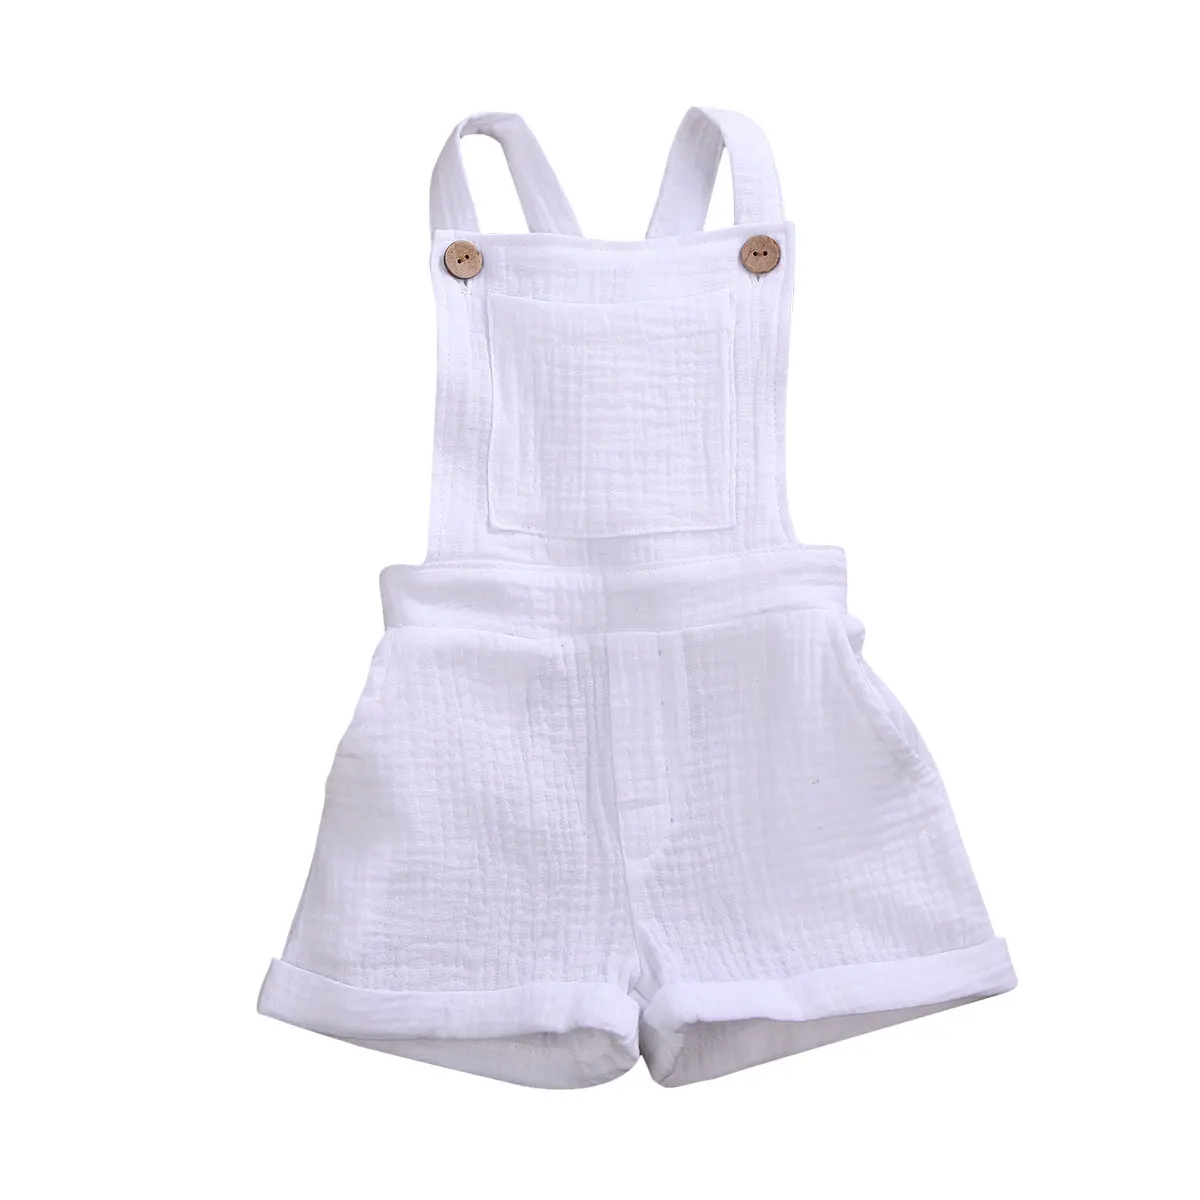 

Toddler Newborn Ifant Baby Clothes Bib Rompers Unisex Boy Girls Kids Overall Solid Color Suspender Pants Children's Clothing Set